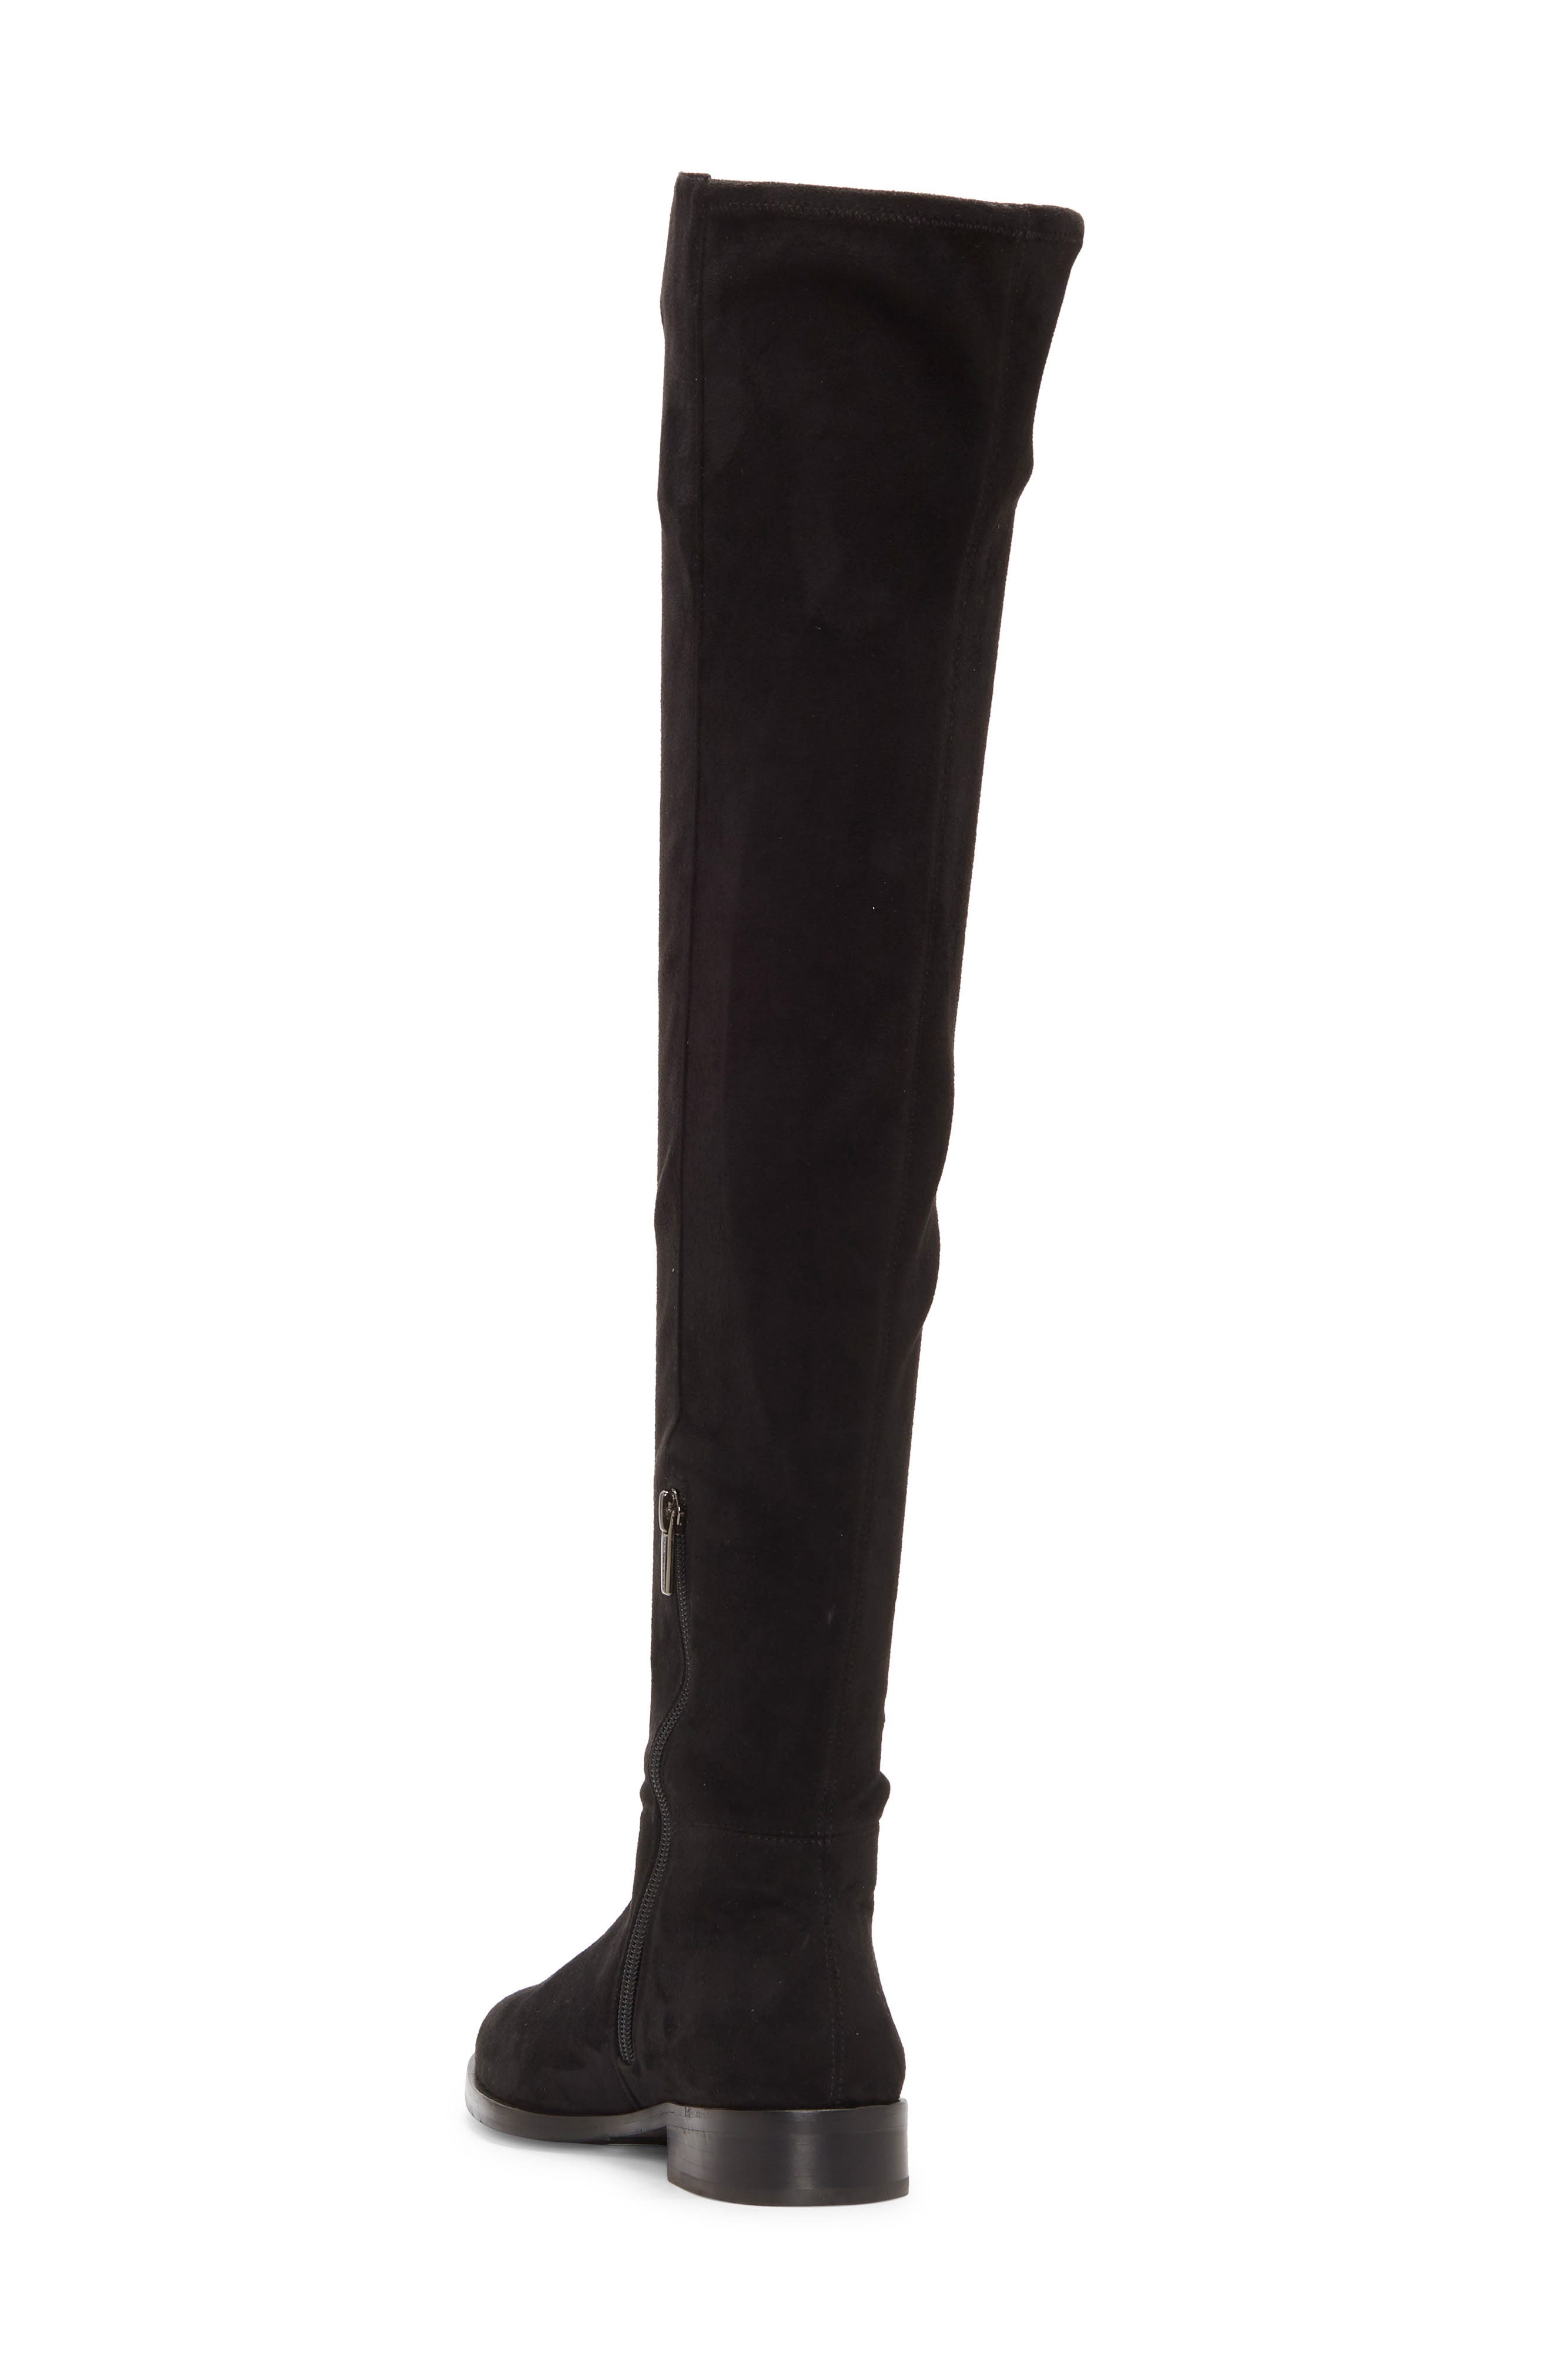 vince camuto over the knee leather boots